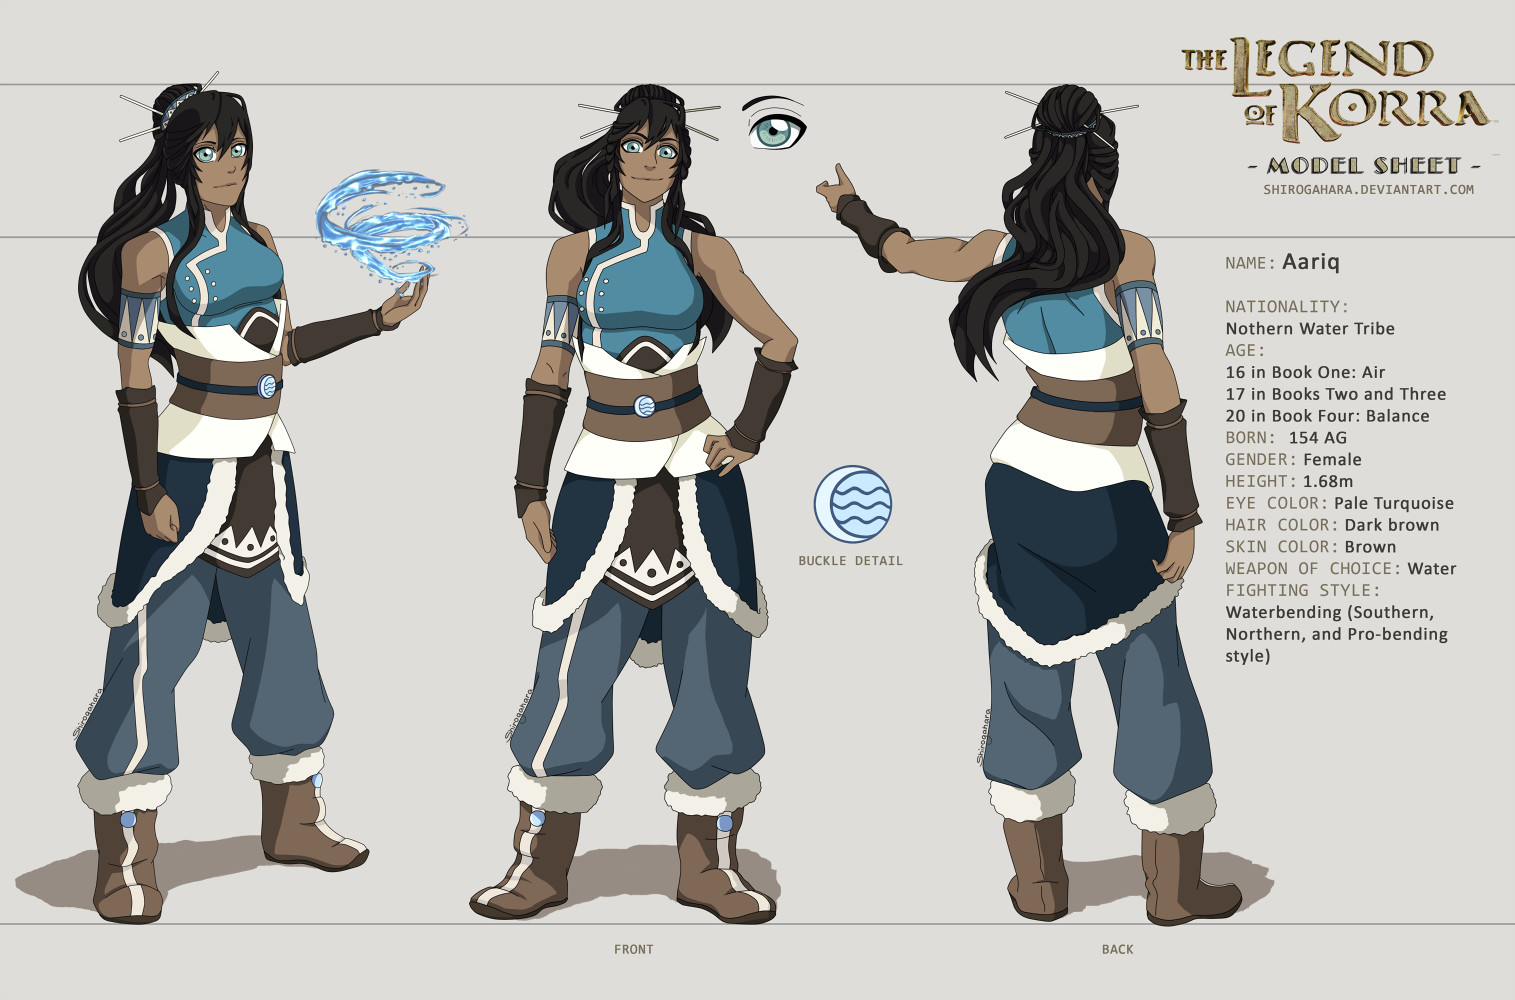 Characters  Avatar The Last Airbender  The Legend of Korra Guide  IGN